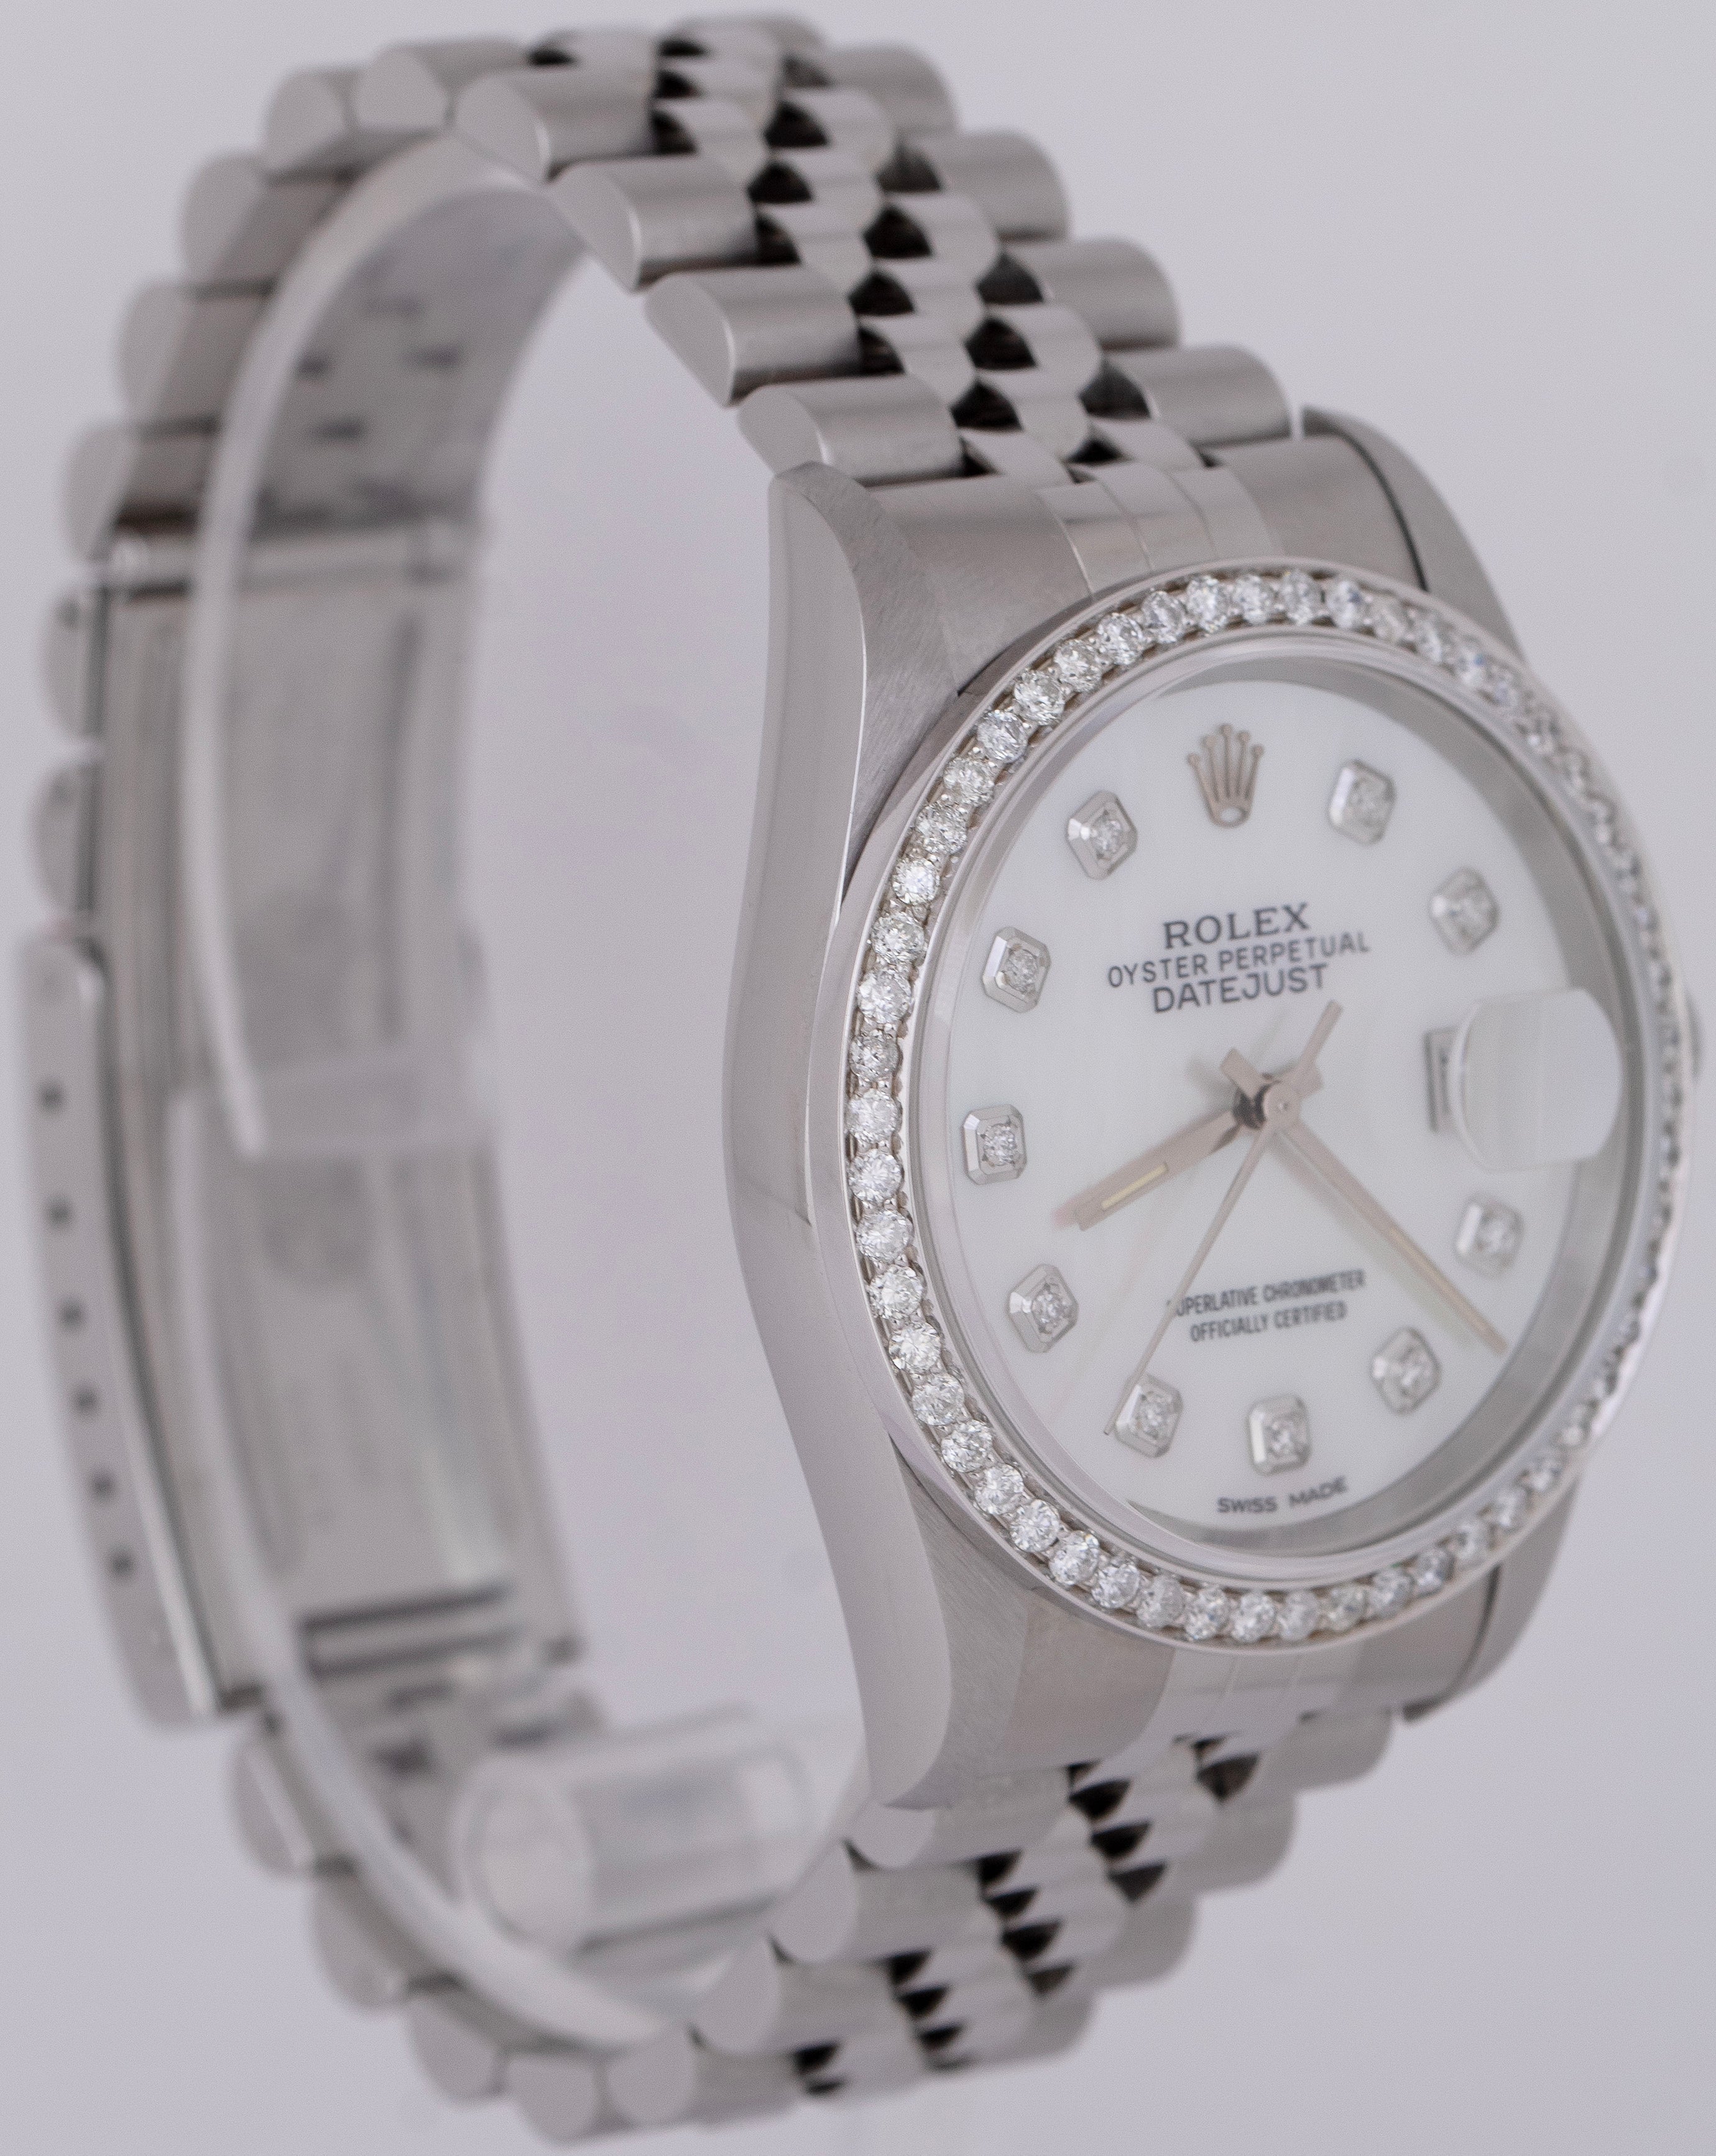 MINT PAPES Rolex DateJust DIAMOND Mother Of Pearl 36mm NO-HOLES Watch 16220 B+P